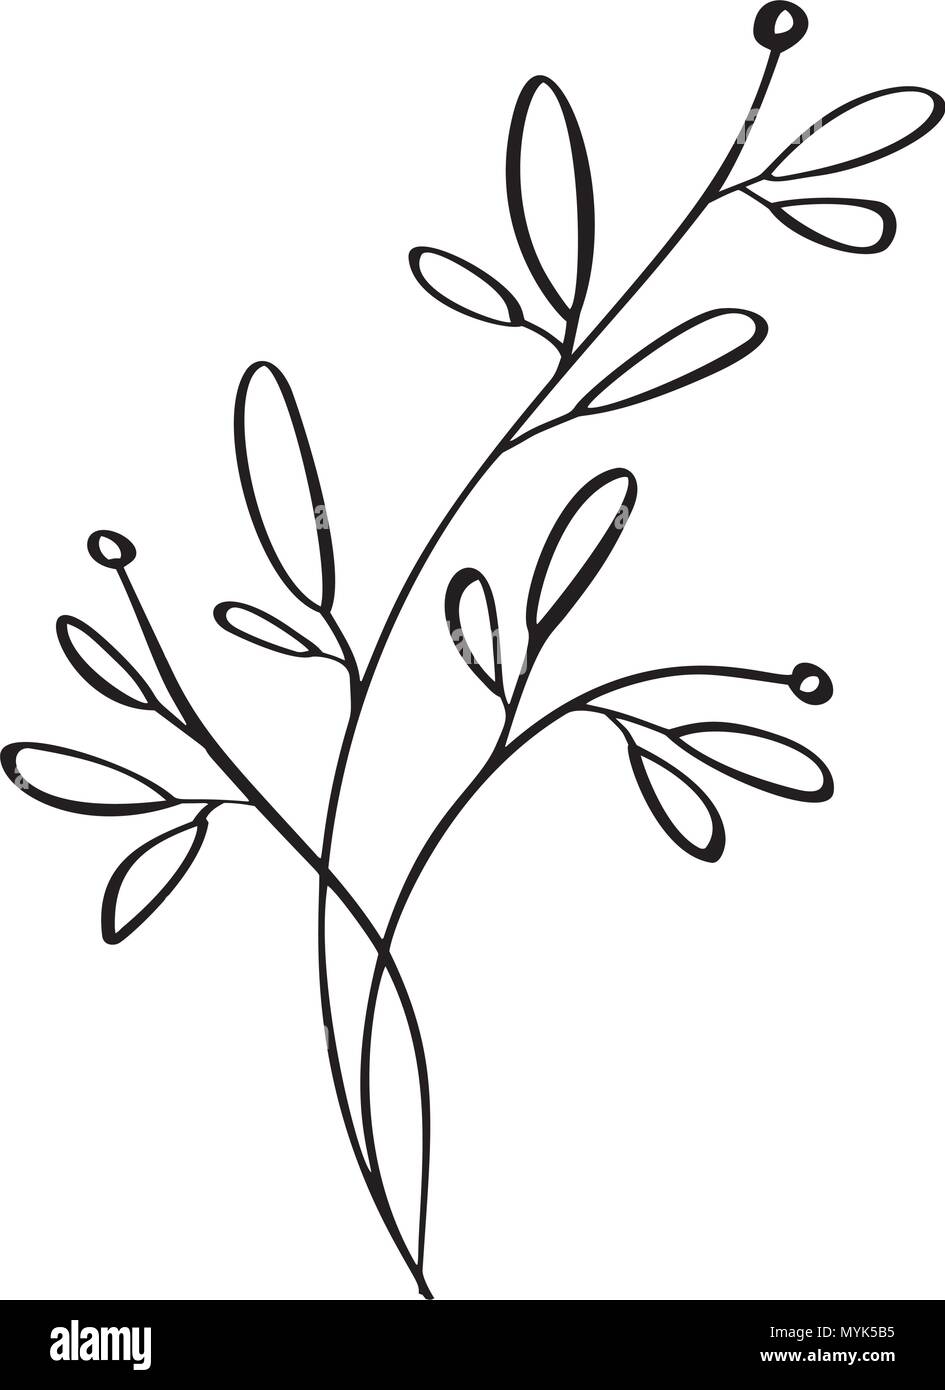 388477 Simple Flower Drawing Images Stock Photos  Vectors  Shutterstock